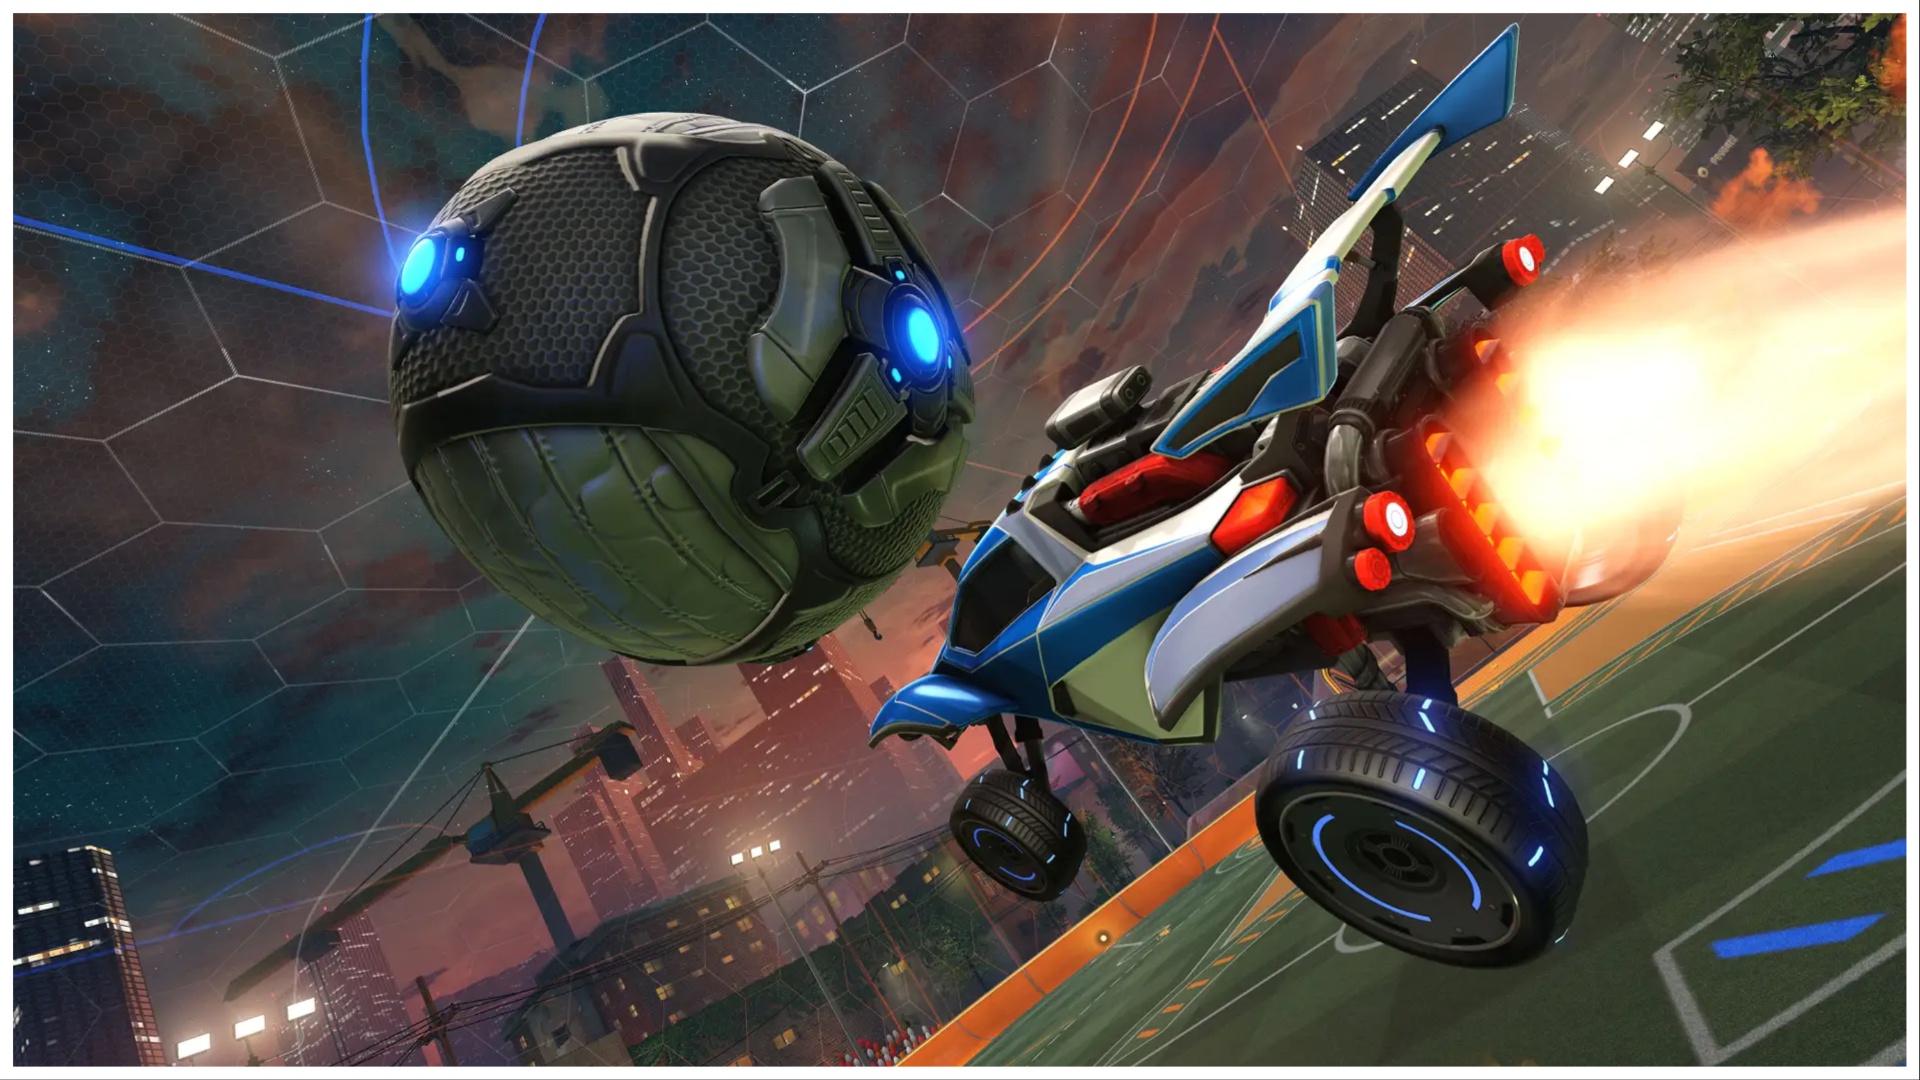 The image shows a buggy slamming into a mechanical-looking football. We can see jet boosters pushing the car forward into the target ball.